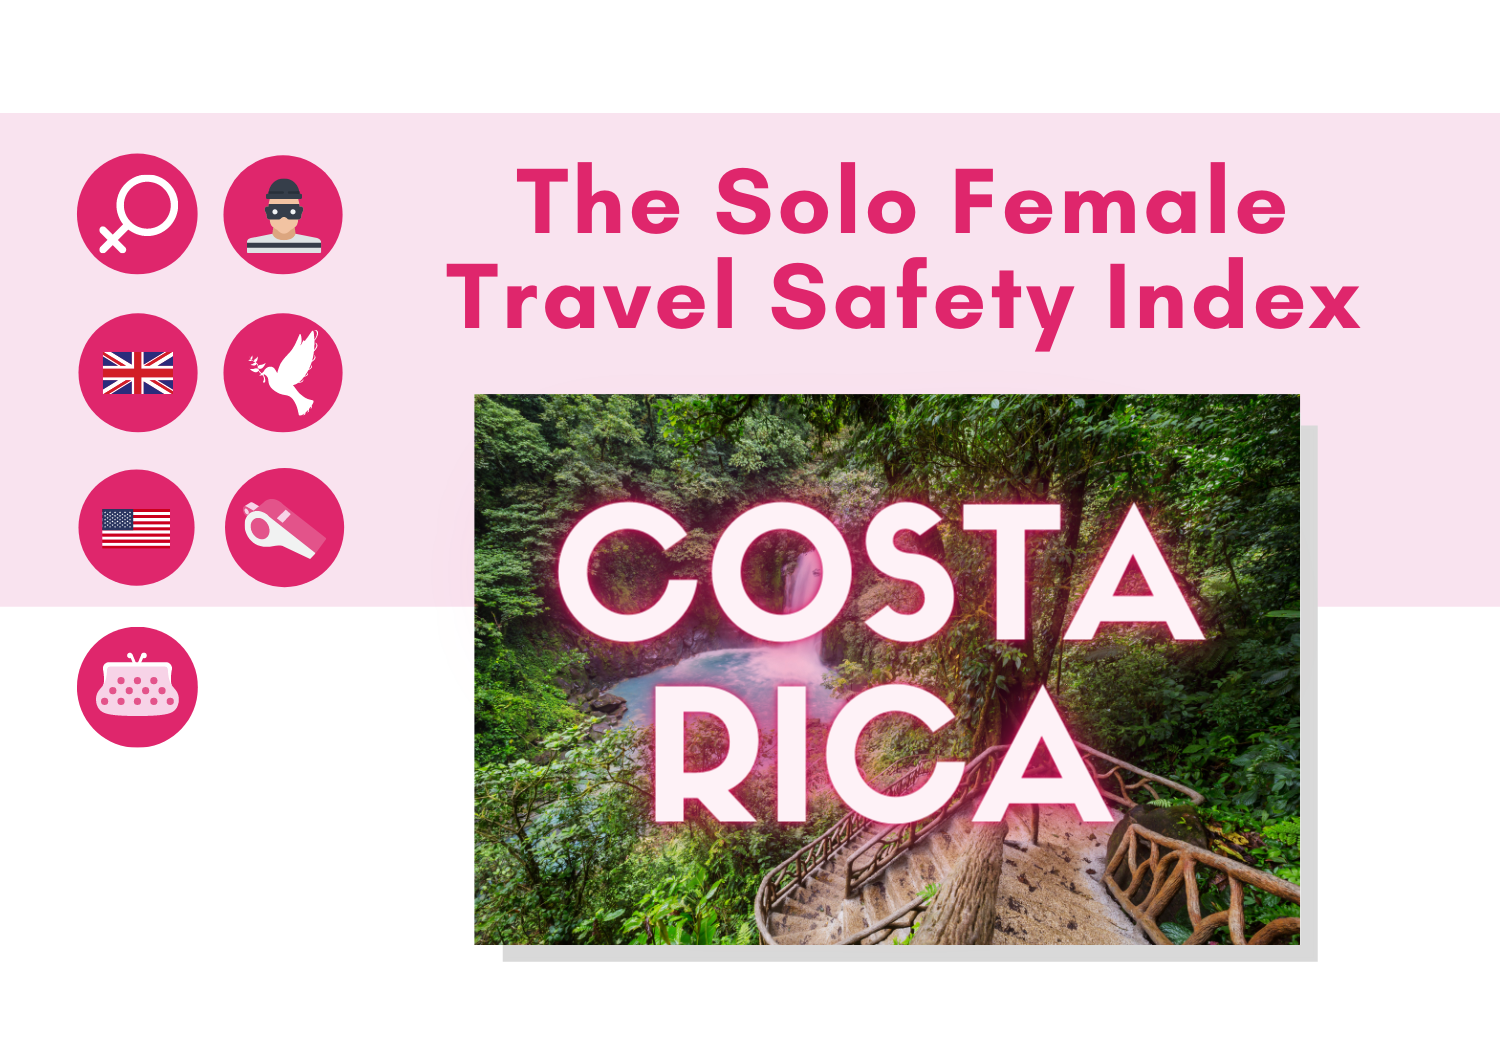 Solo female travel safety in Costa Rica